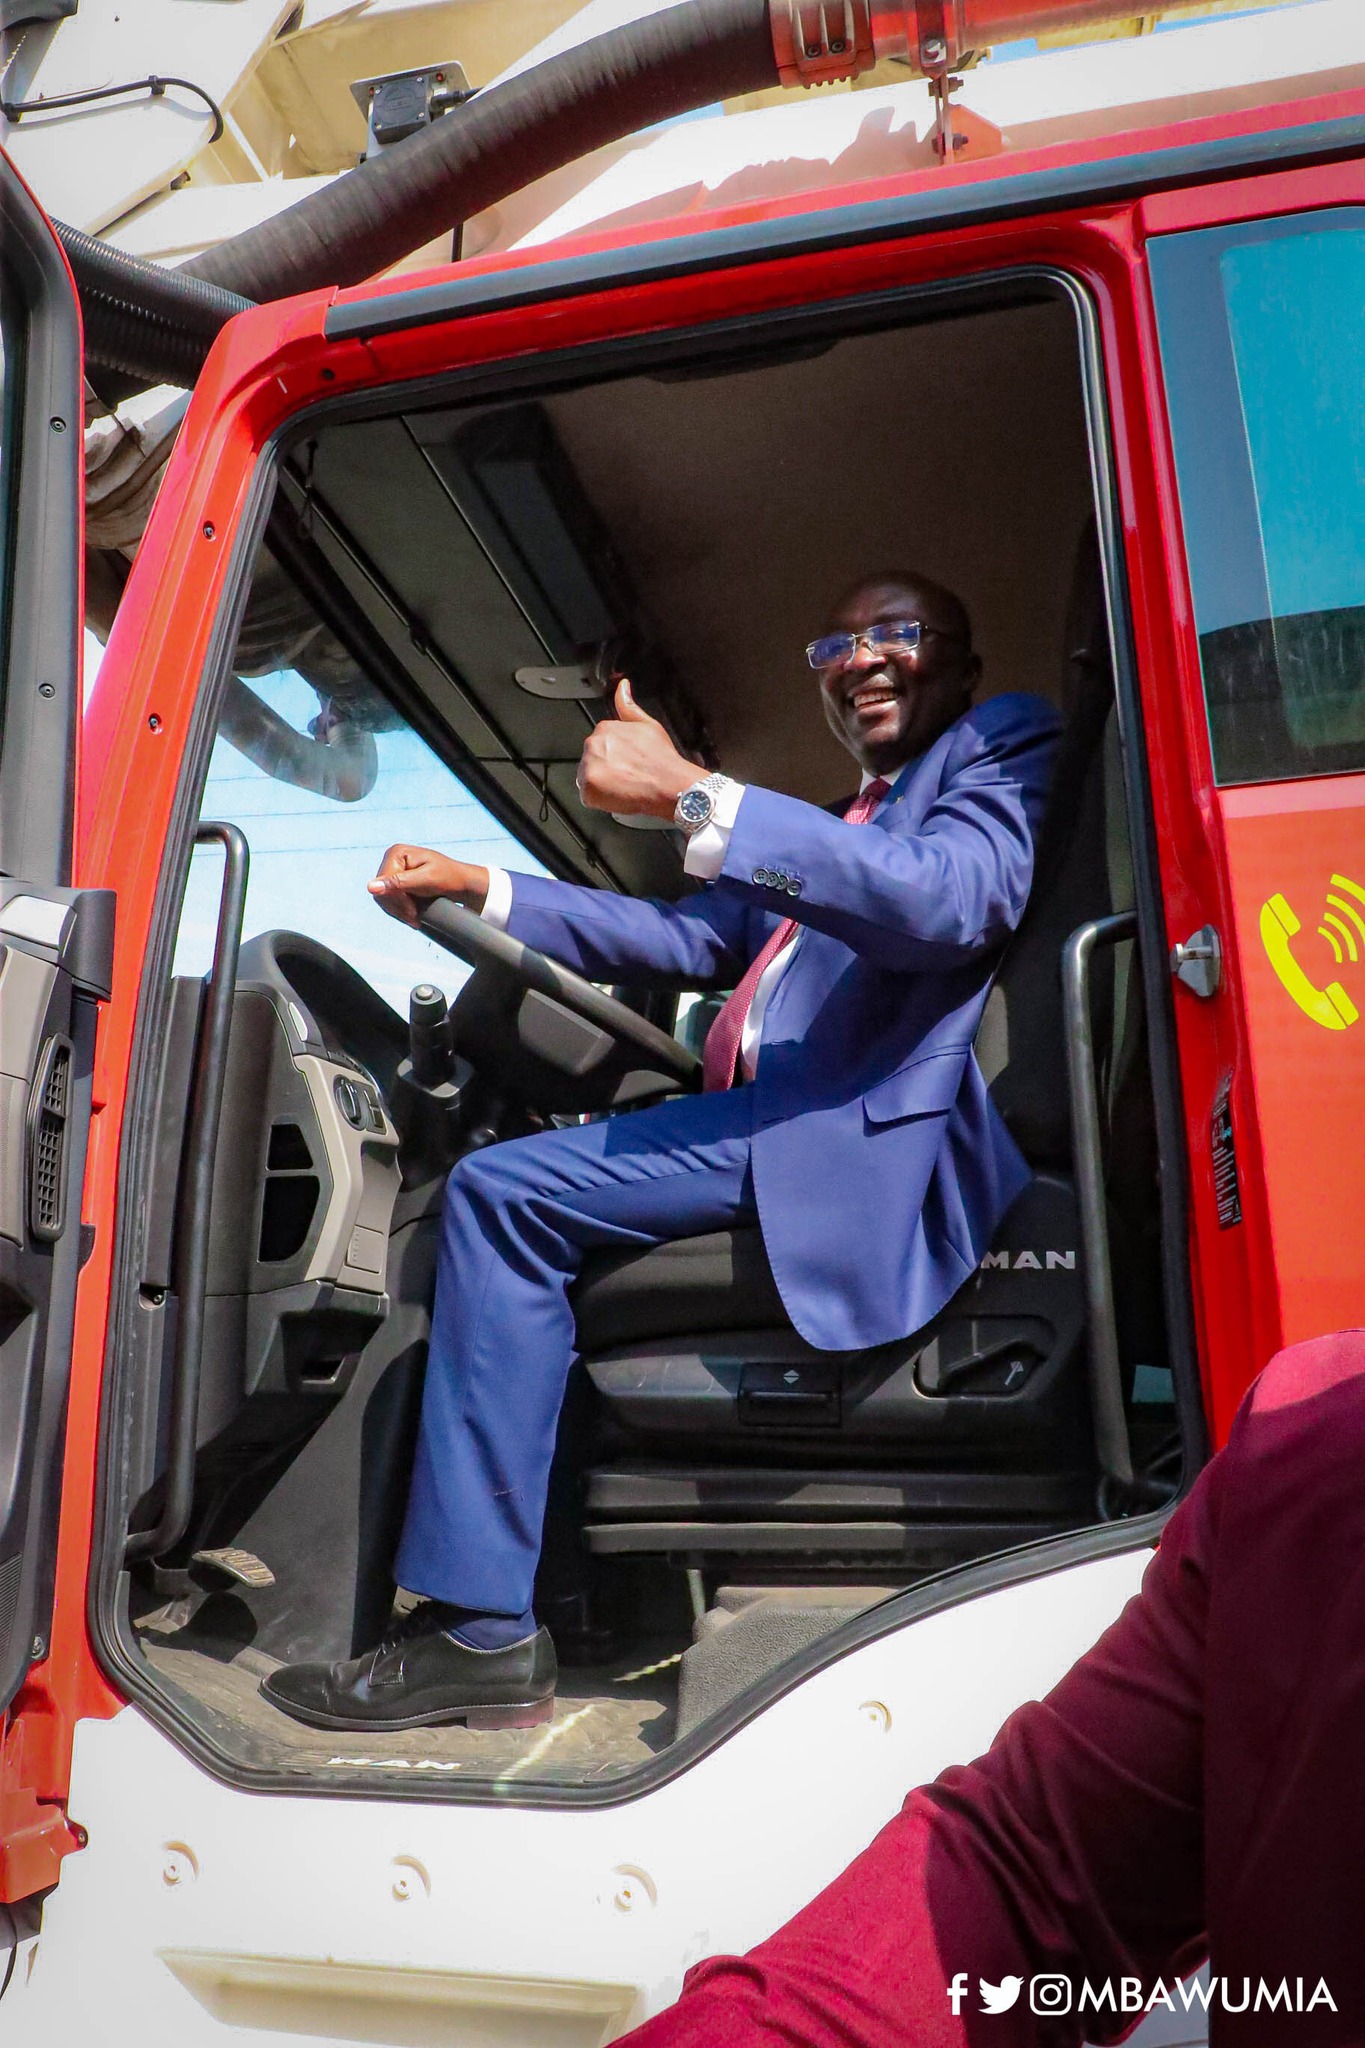 Ghana New facilities, operational vehicles commissioned for Ghana Fire Servicewill become best centre for training fire service professionals in West Africa - Bawumia